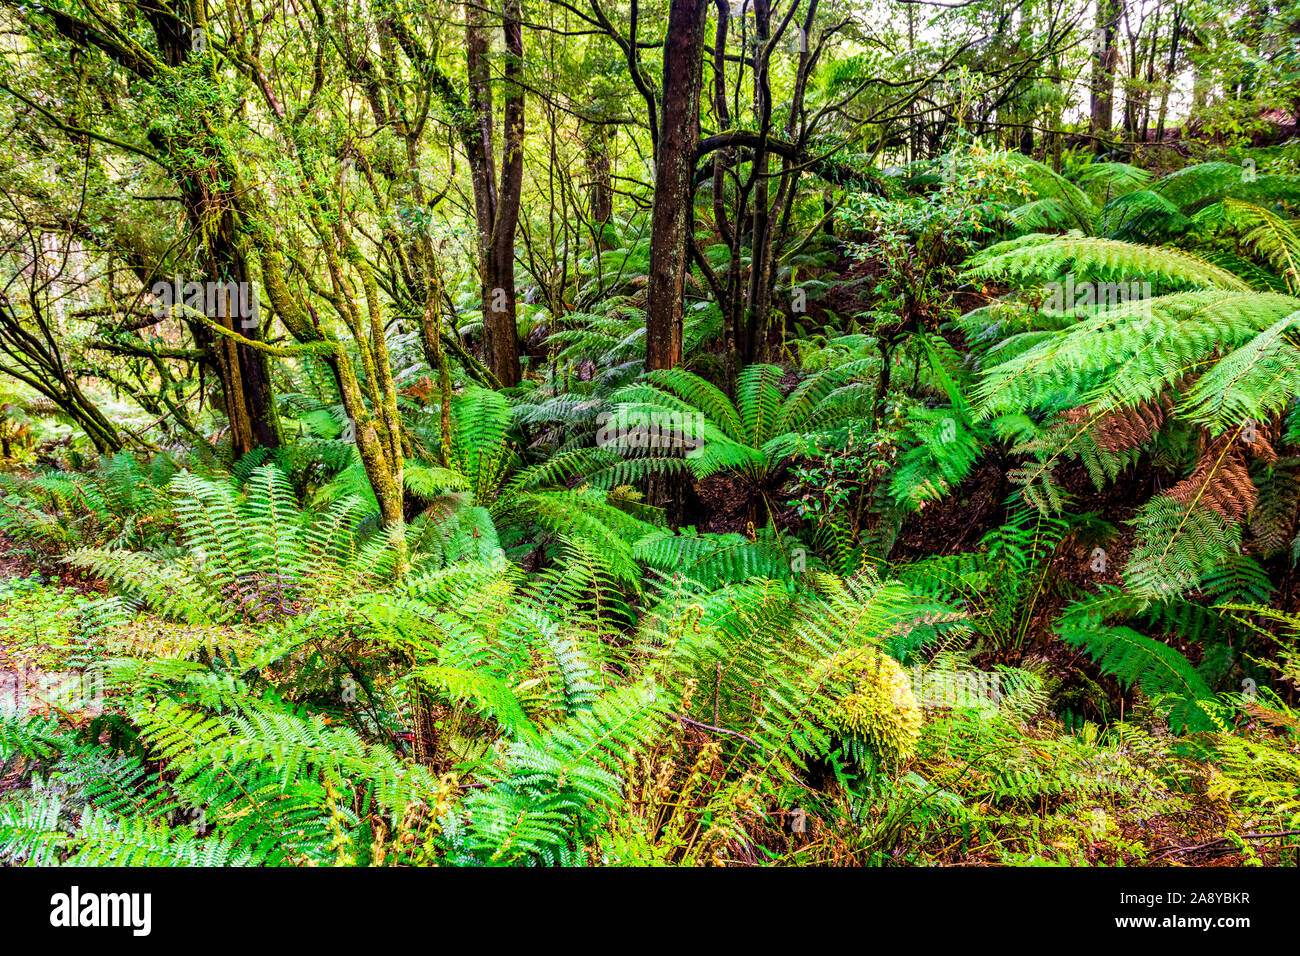 Dense temperate rainforest in Melba Gully along Madsens Track in the Great Otway National Park Stock Photo